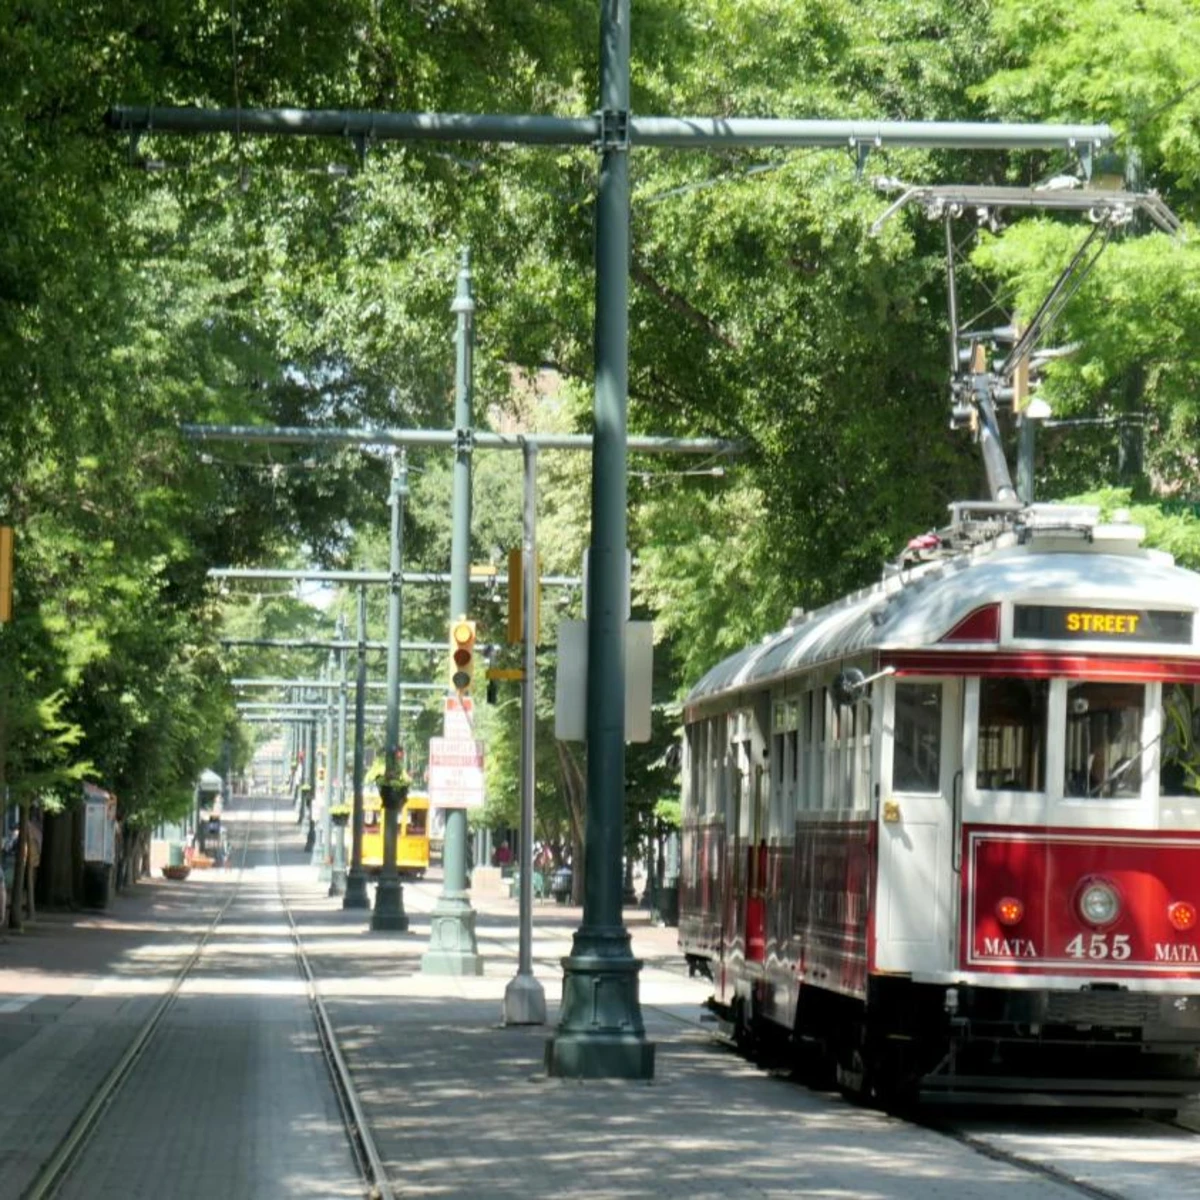 Cable car in Memphis through tree-lined streets.